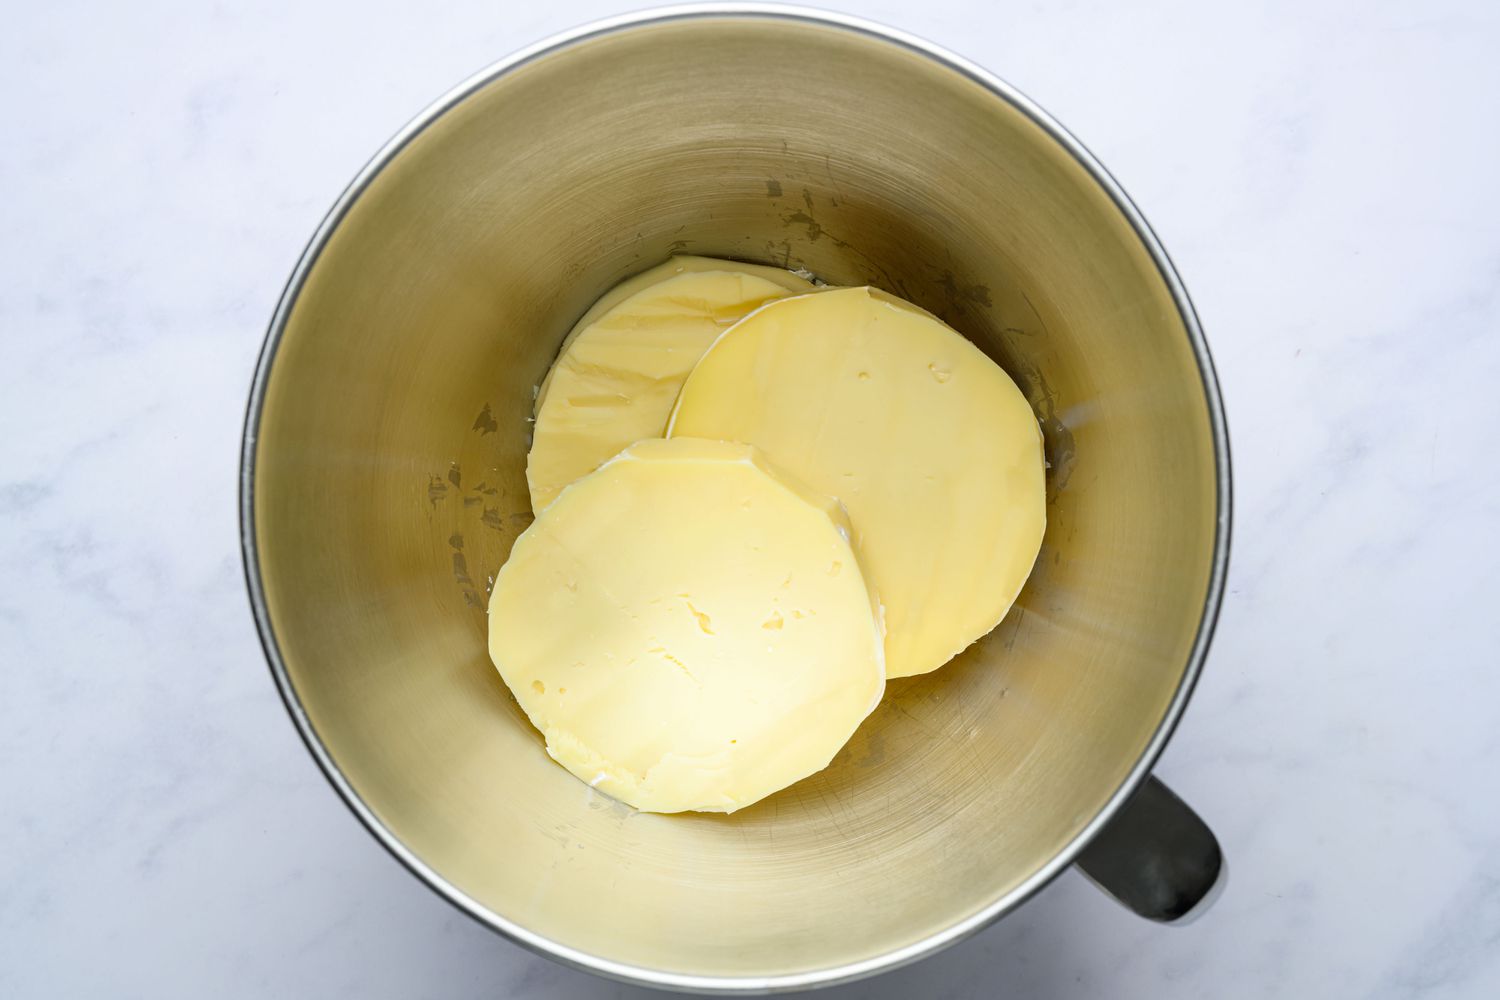 Three discs of brie with the rind removed, in a large mixing bowl